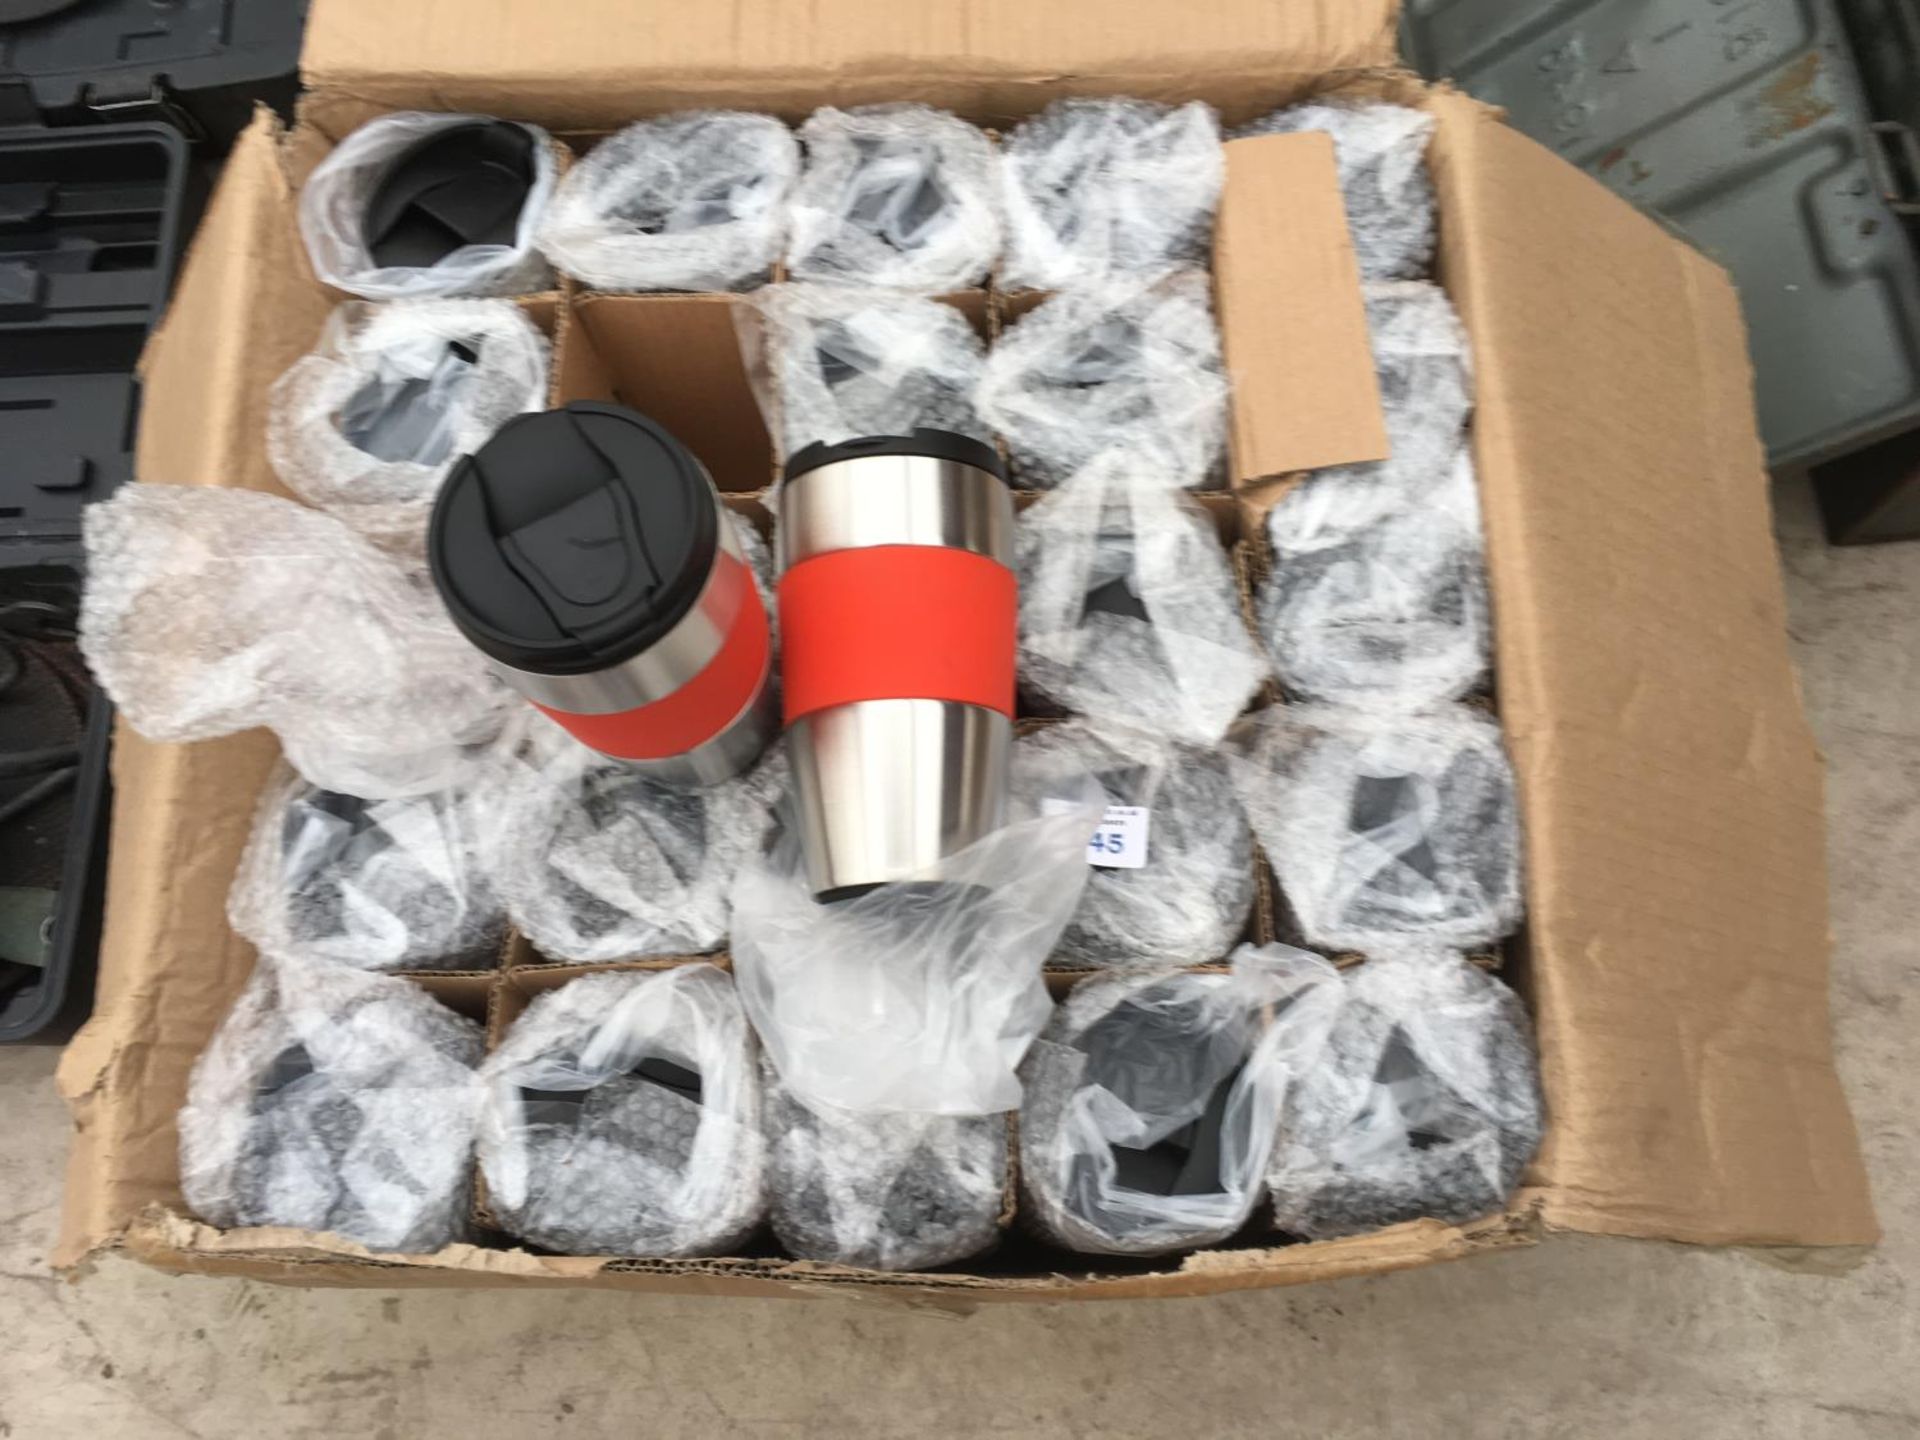 APPROXIMATELY FIFTY AS NEW BOXED AND WRAPPED TRAVEL MUGS